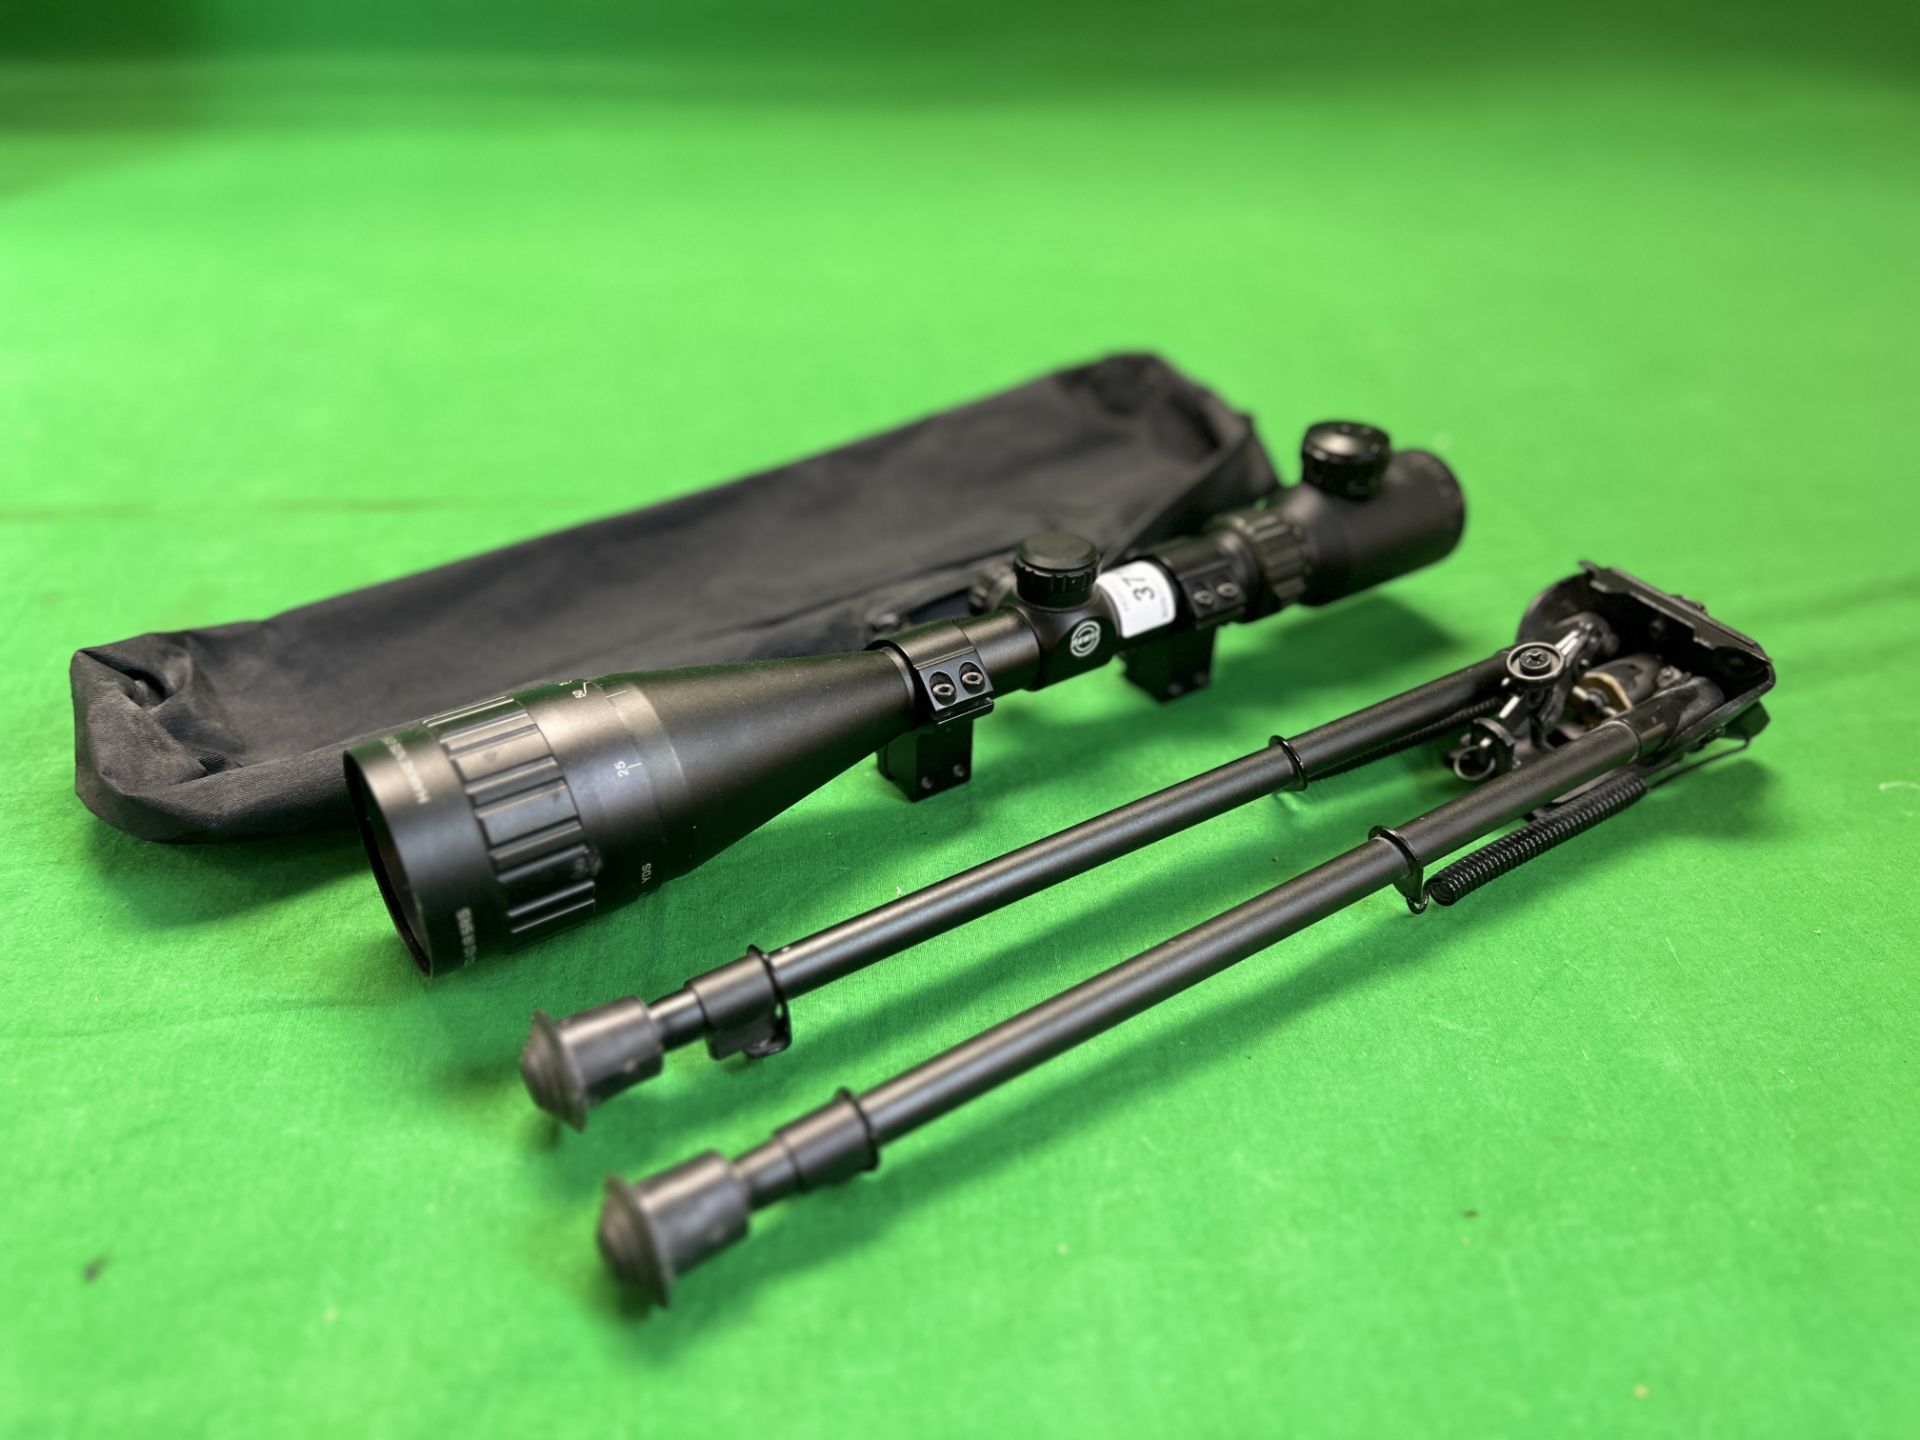 HAWKE NITE-EYE 4-16X50 AO IR SR6 RIFLE SCOPE COMPLETE WITH MOUNTS AND CANVAS BAG ALONG WITH RIFLE